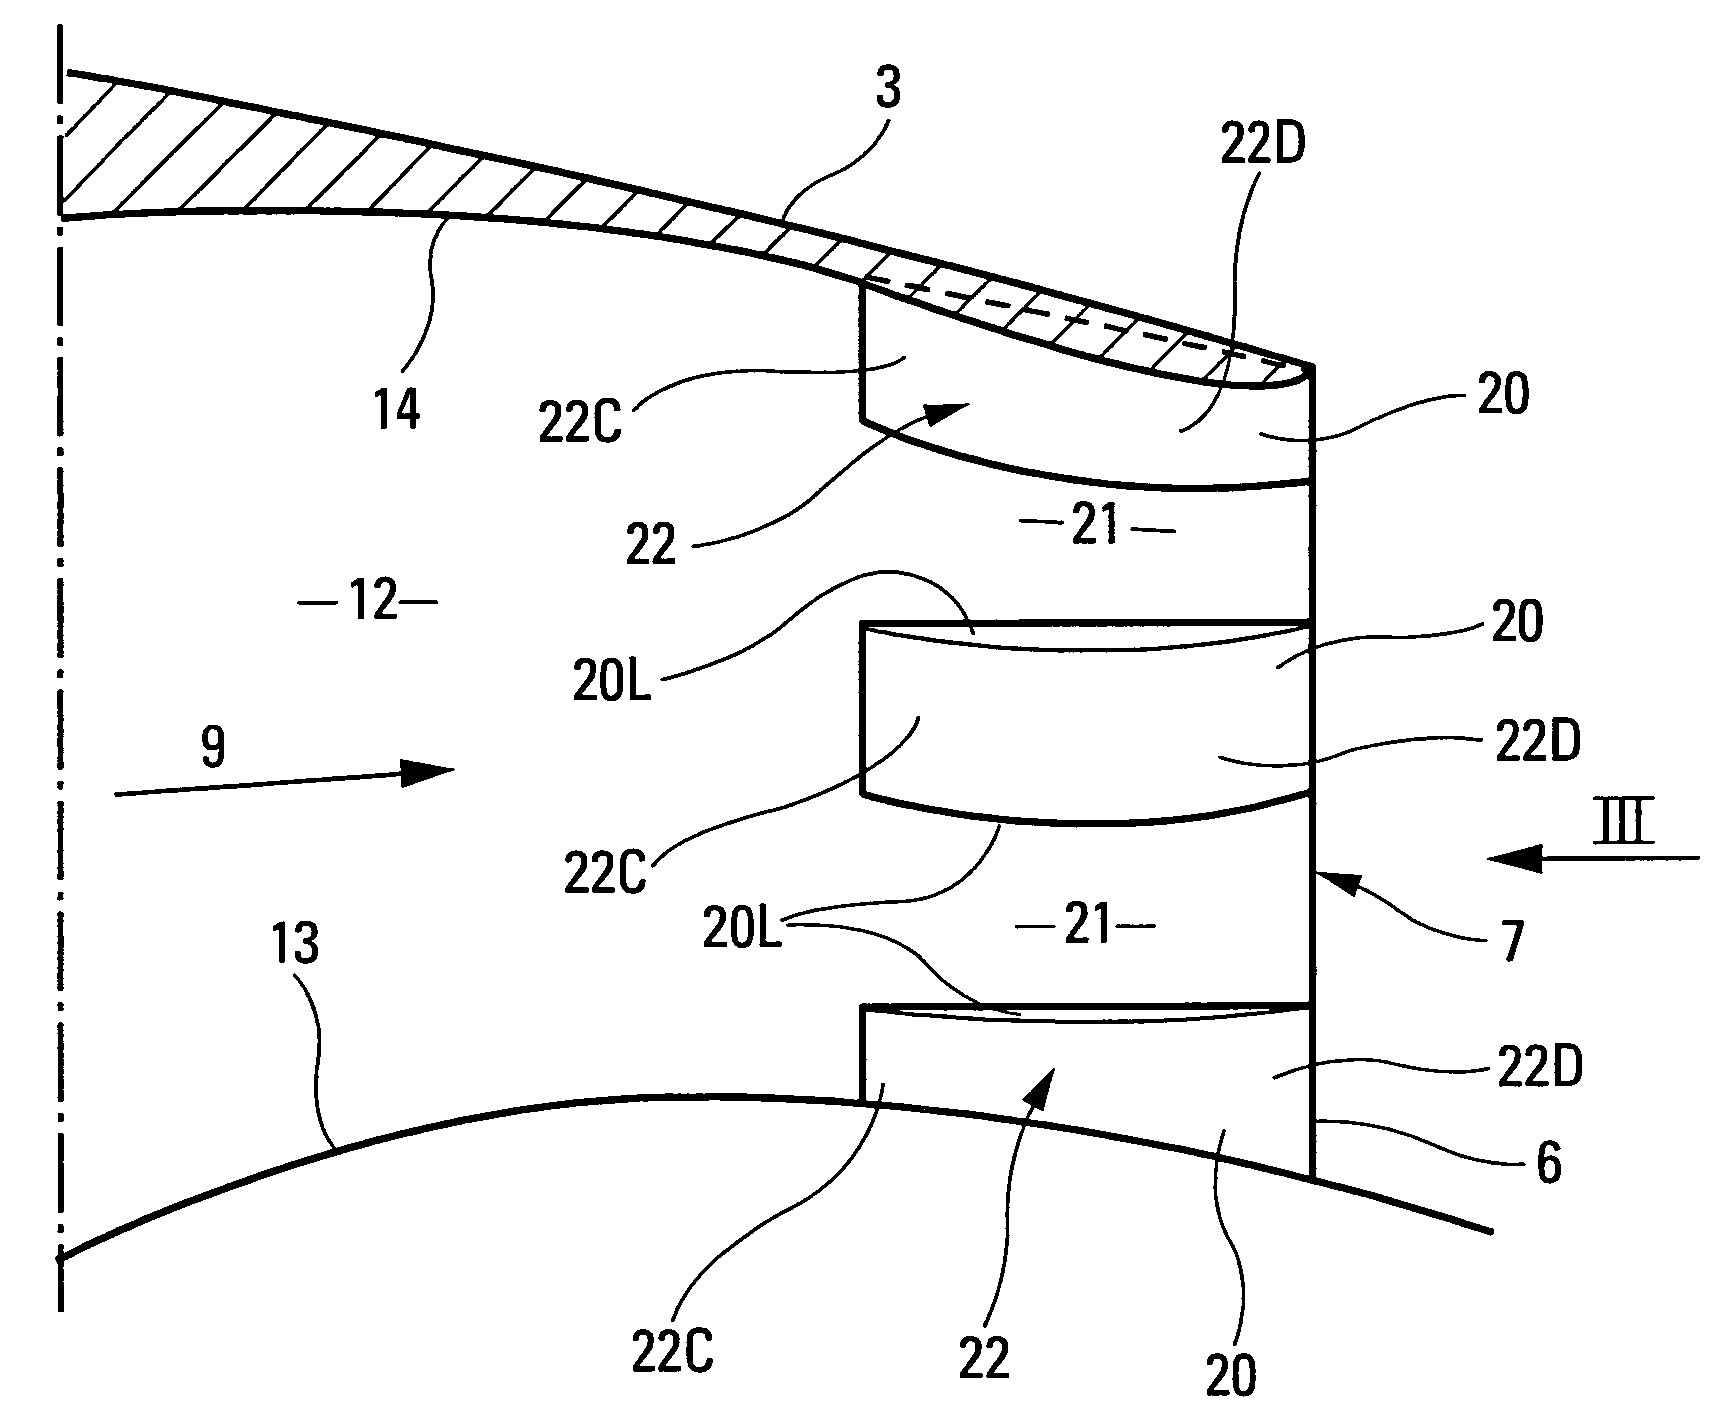 Turboshaft engine with reduced noise emission for aircraft